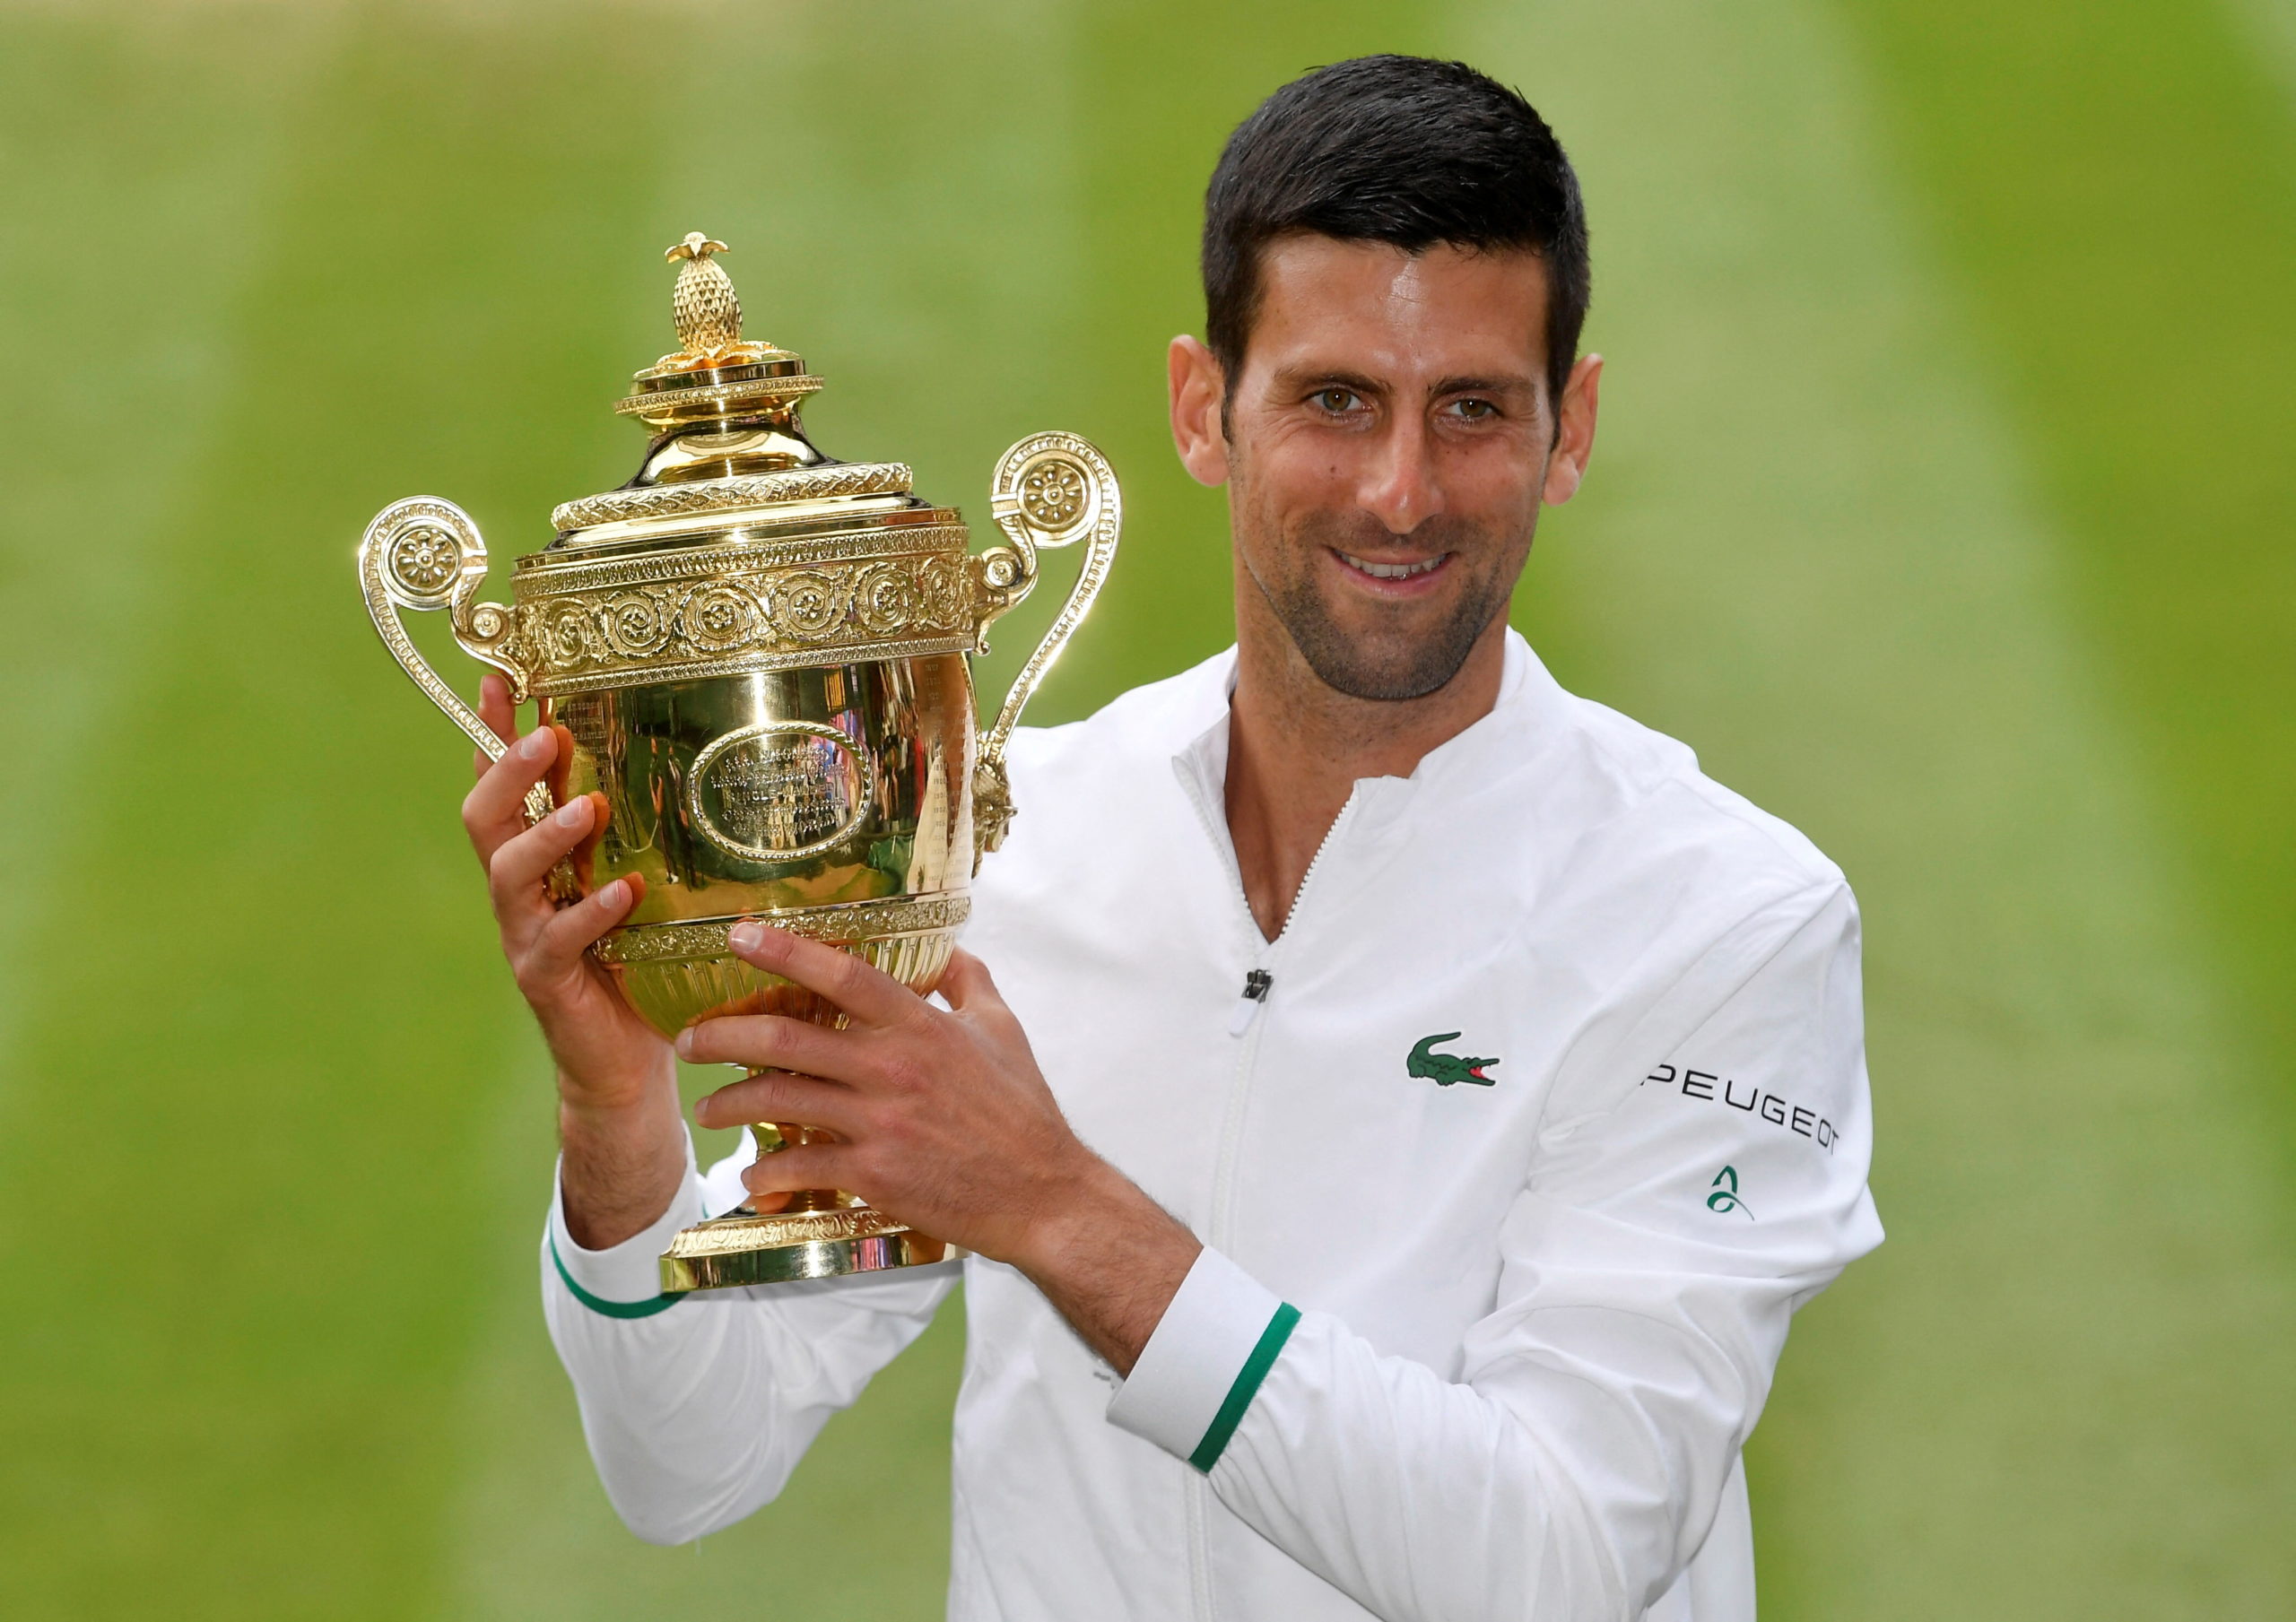 July 11, 2021 Novak Djokovic of Serbia celebrates with the trophy after winning his final match against Matteo Berrettini of Italy 